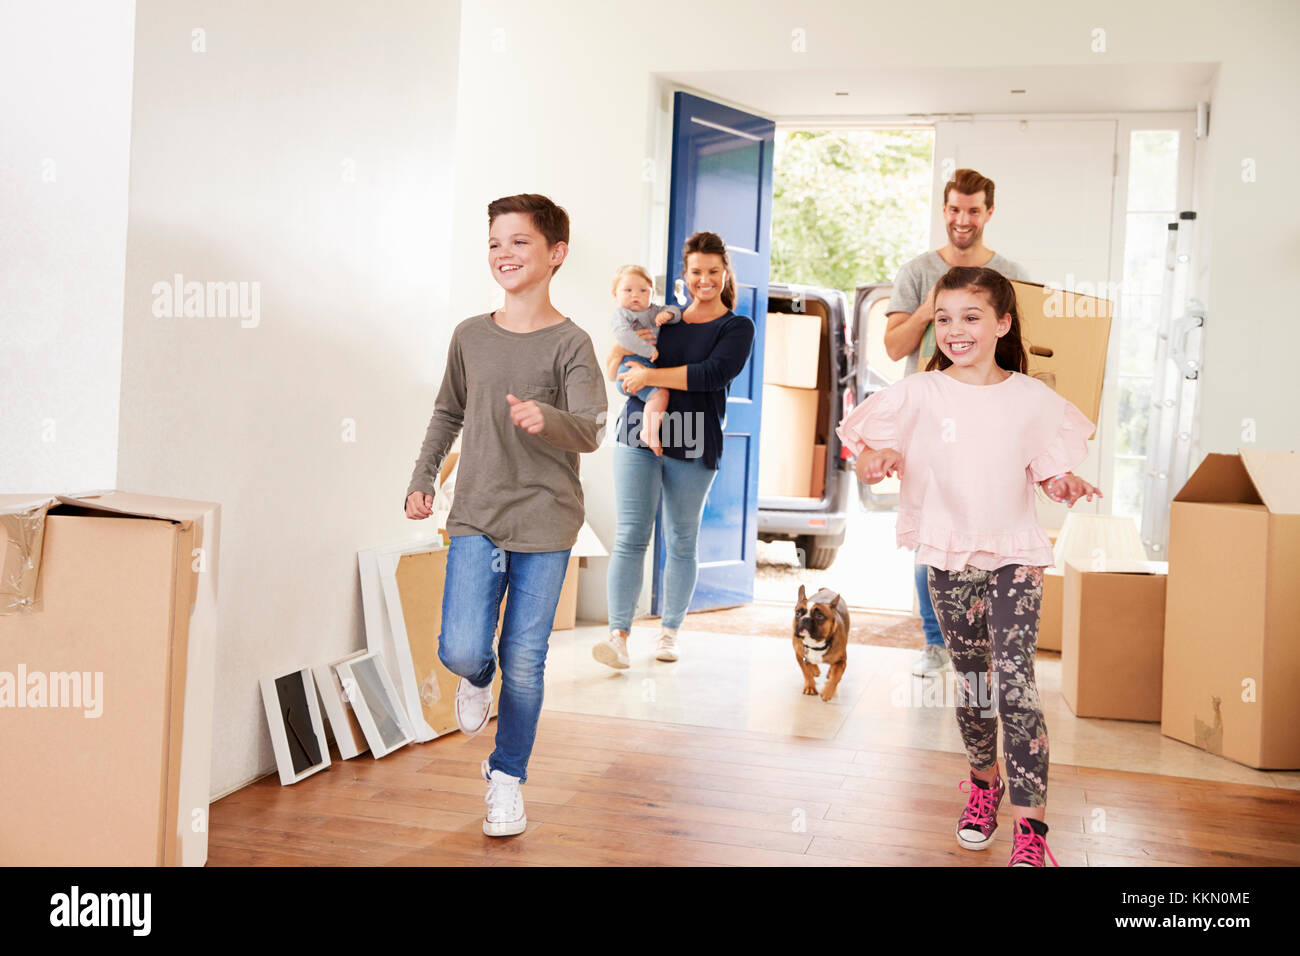 Family Carrying Boxes Into New Home On Moving Day Stock Photo